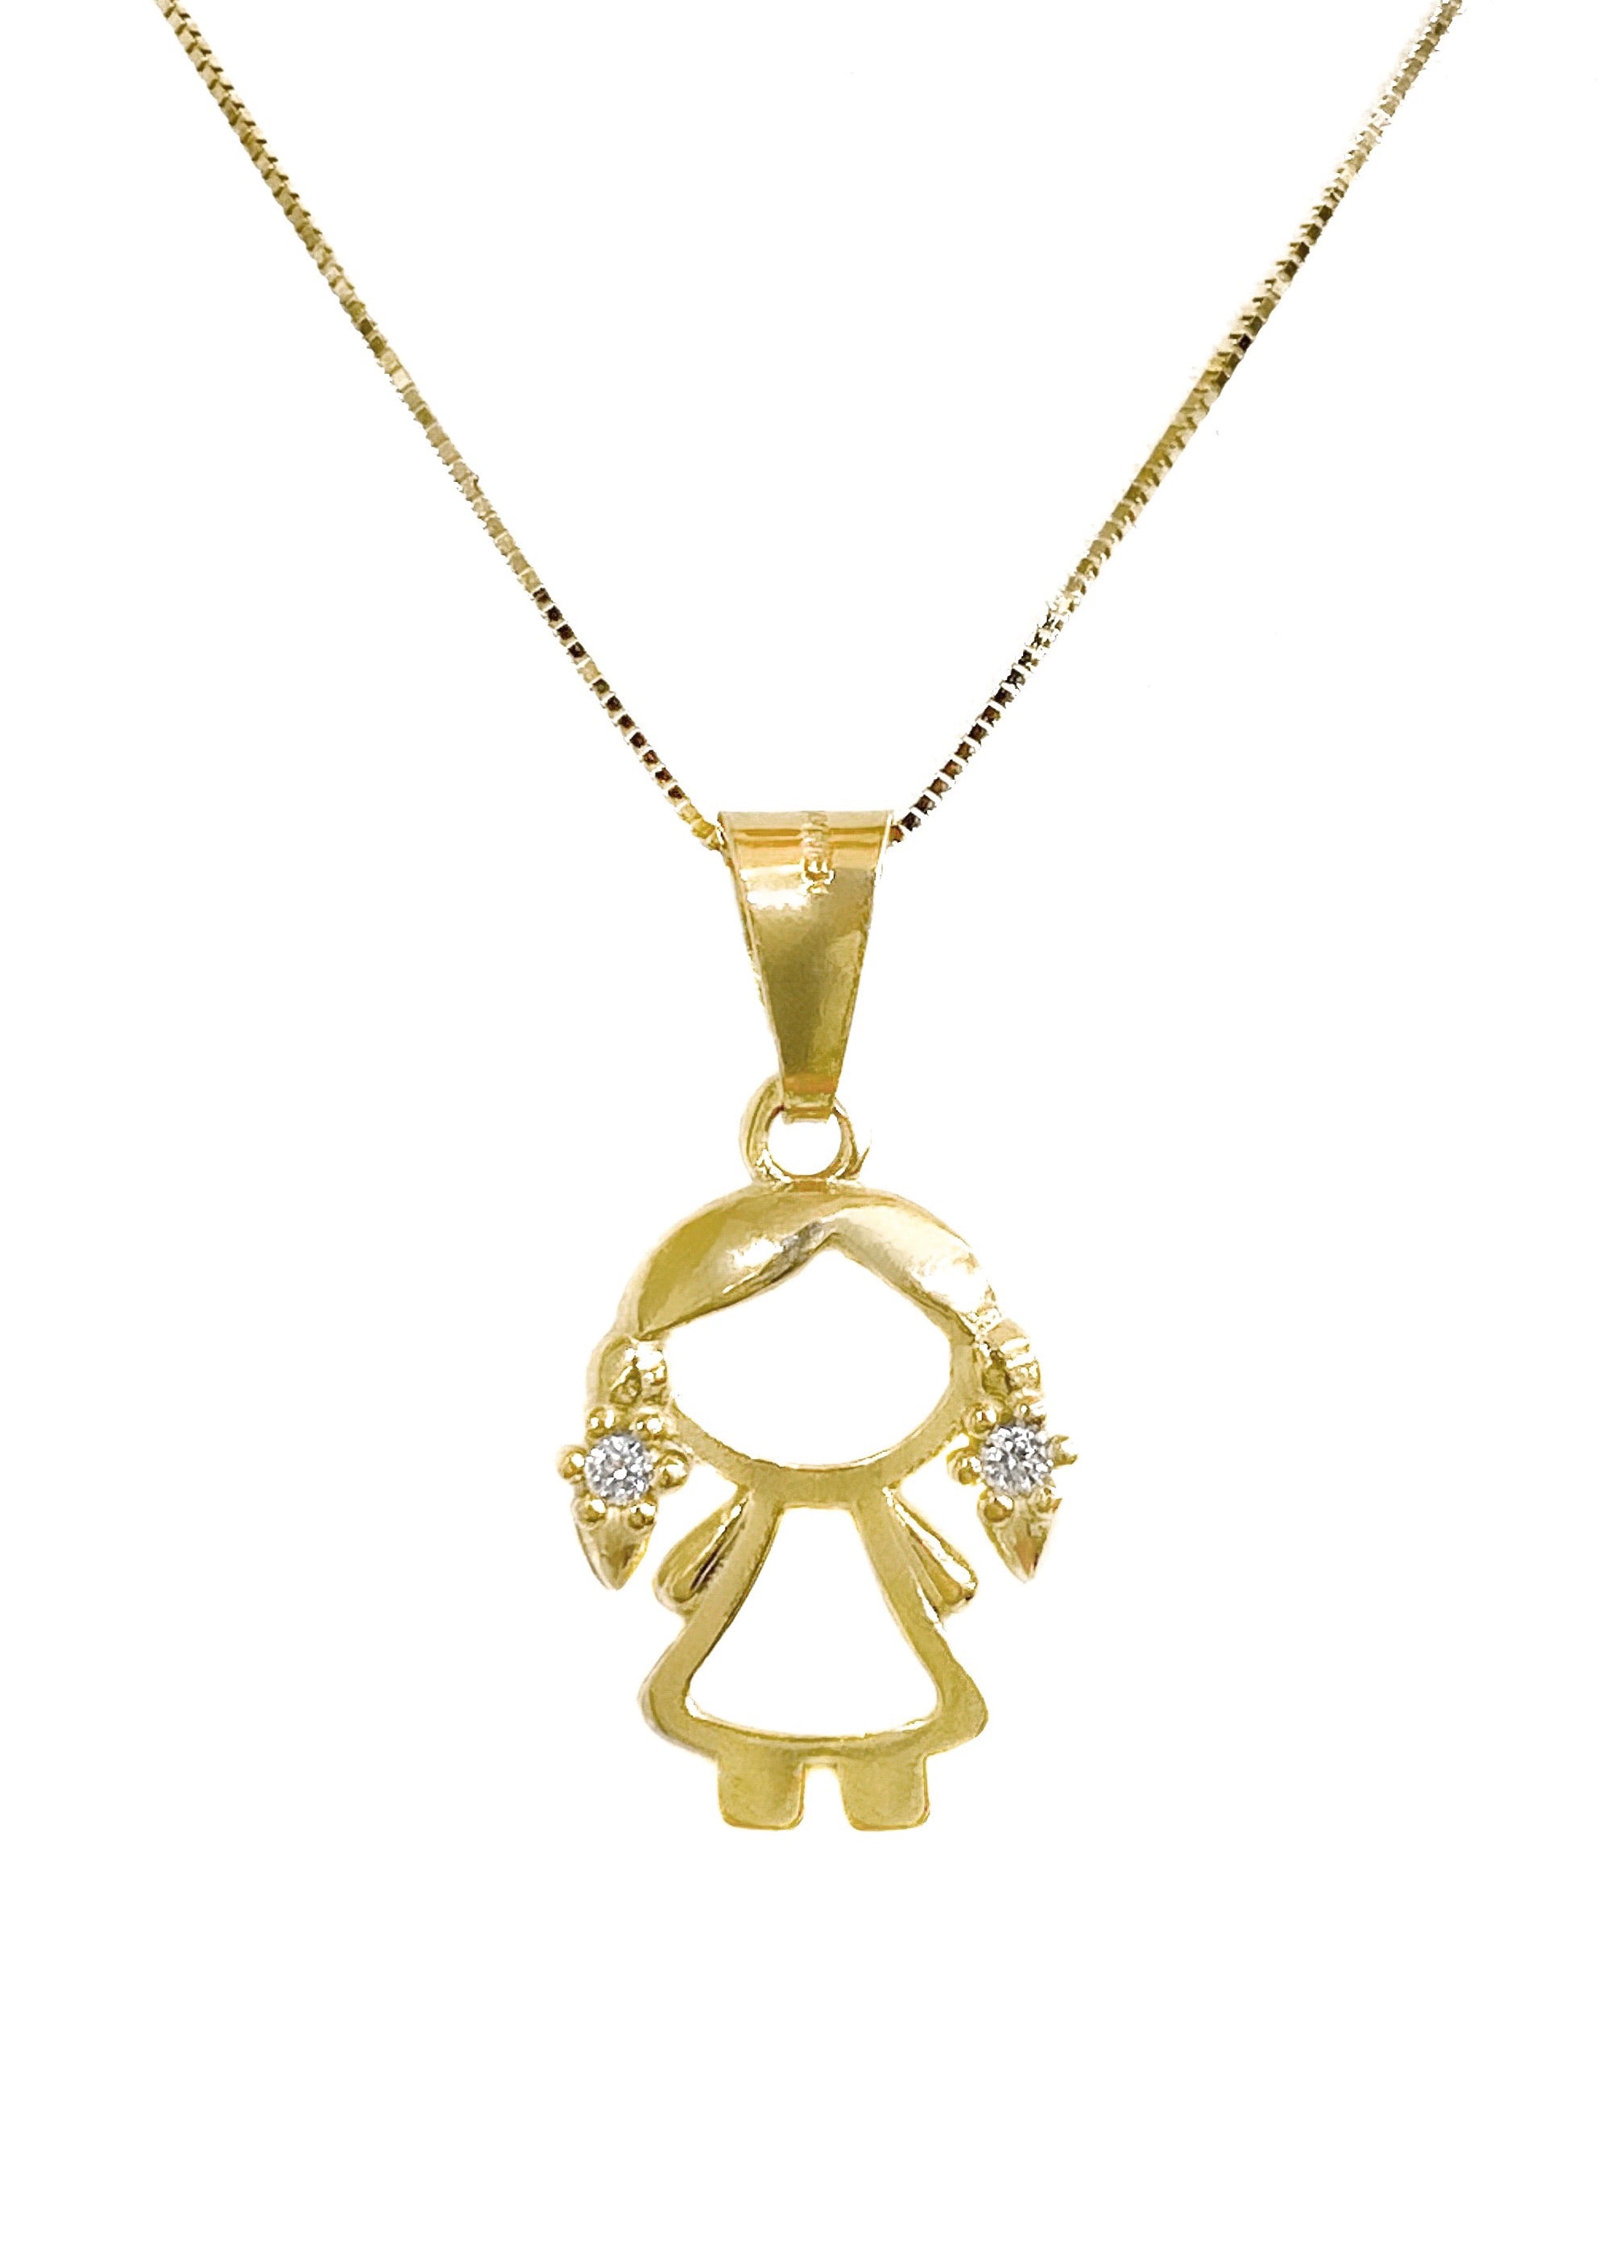 14K YELLOW GOLD IT'S A GIRL NECKLACE